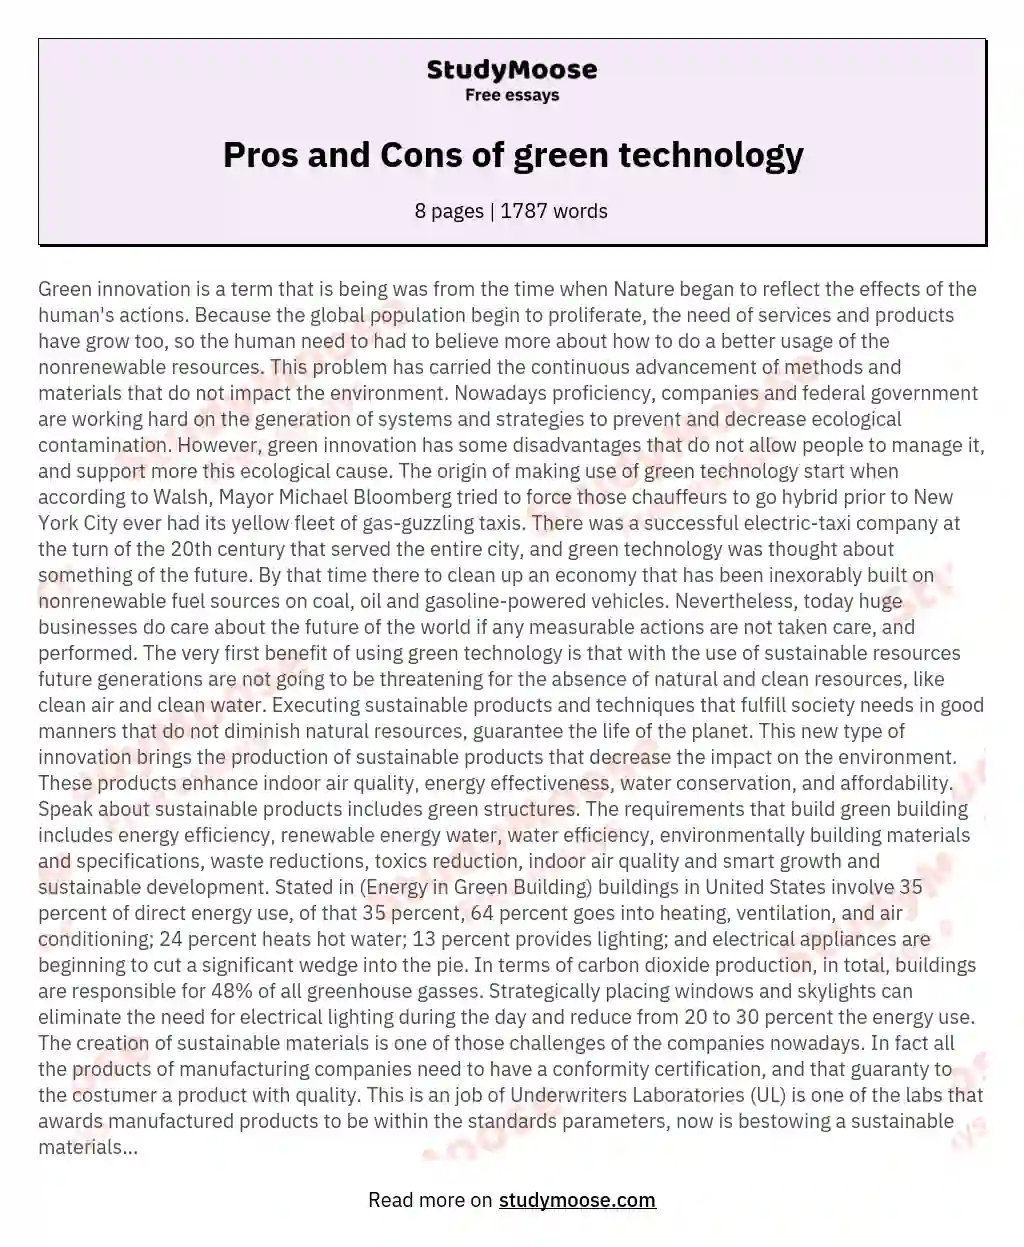 Pros and Cons of green technology essay